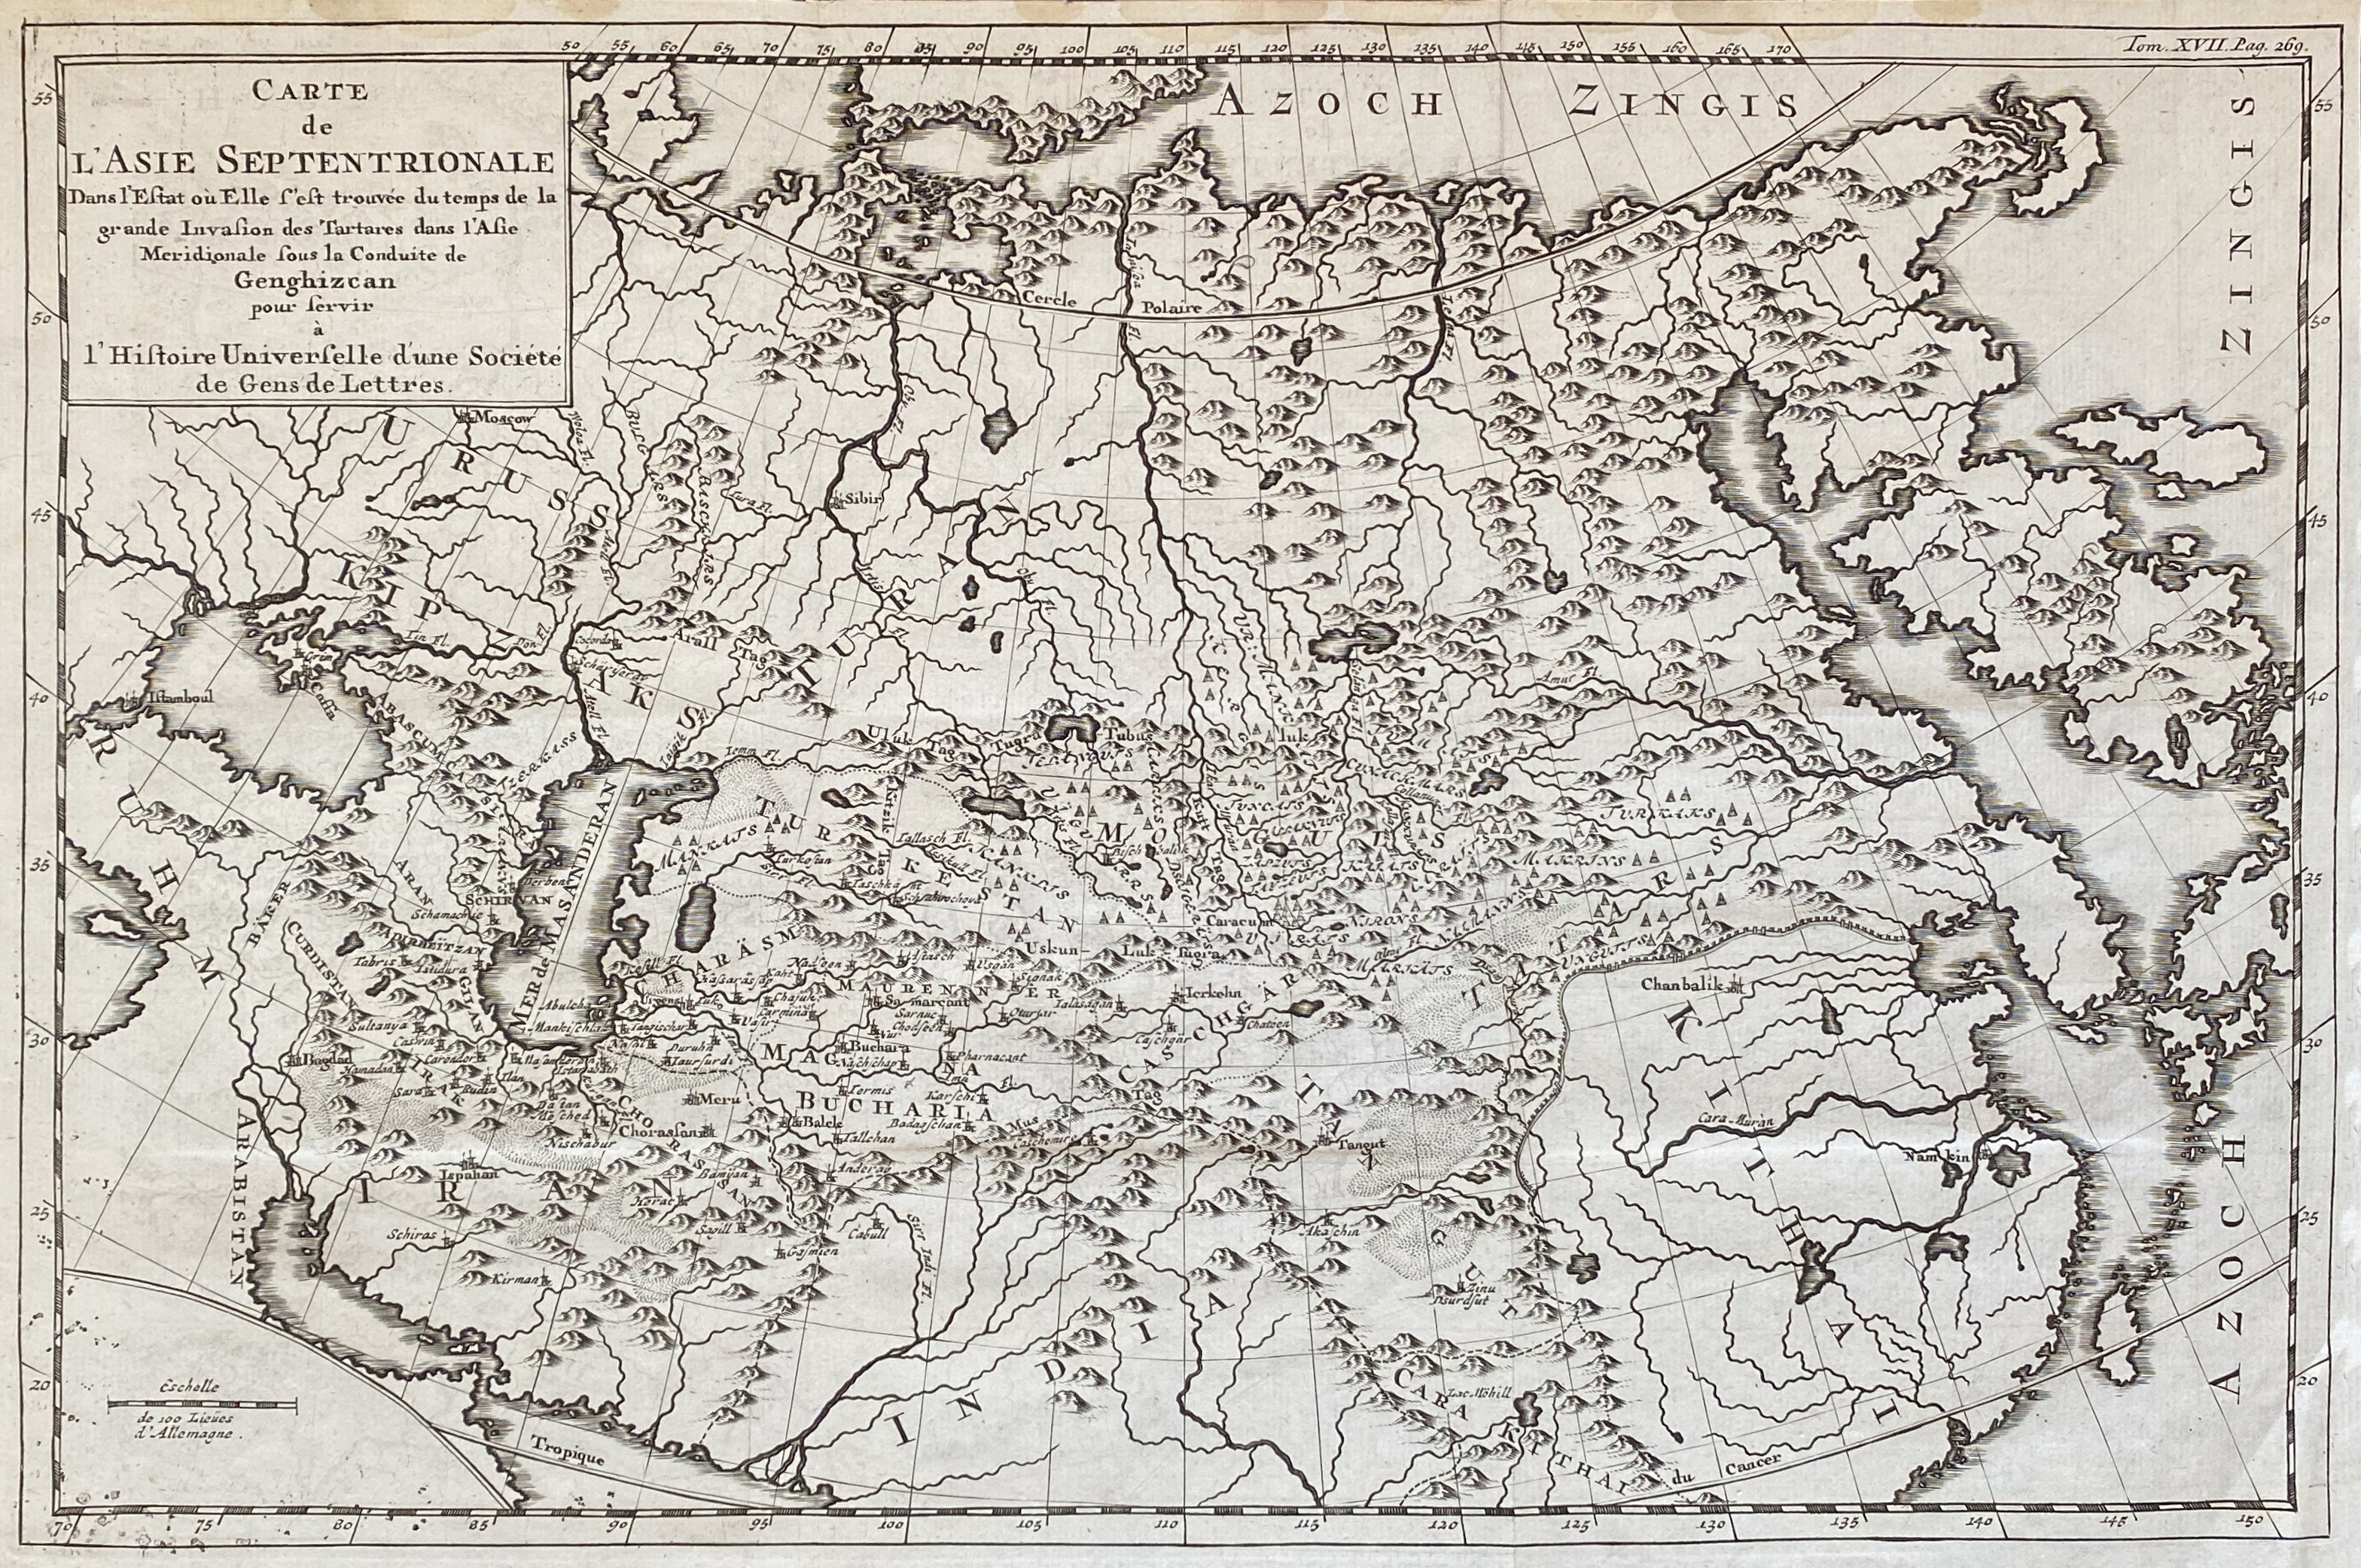 Maps and Masters | (Italiano) CARTE DE L’ASIE SEPTENTRIONALE